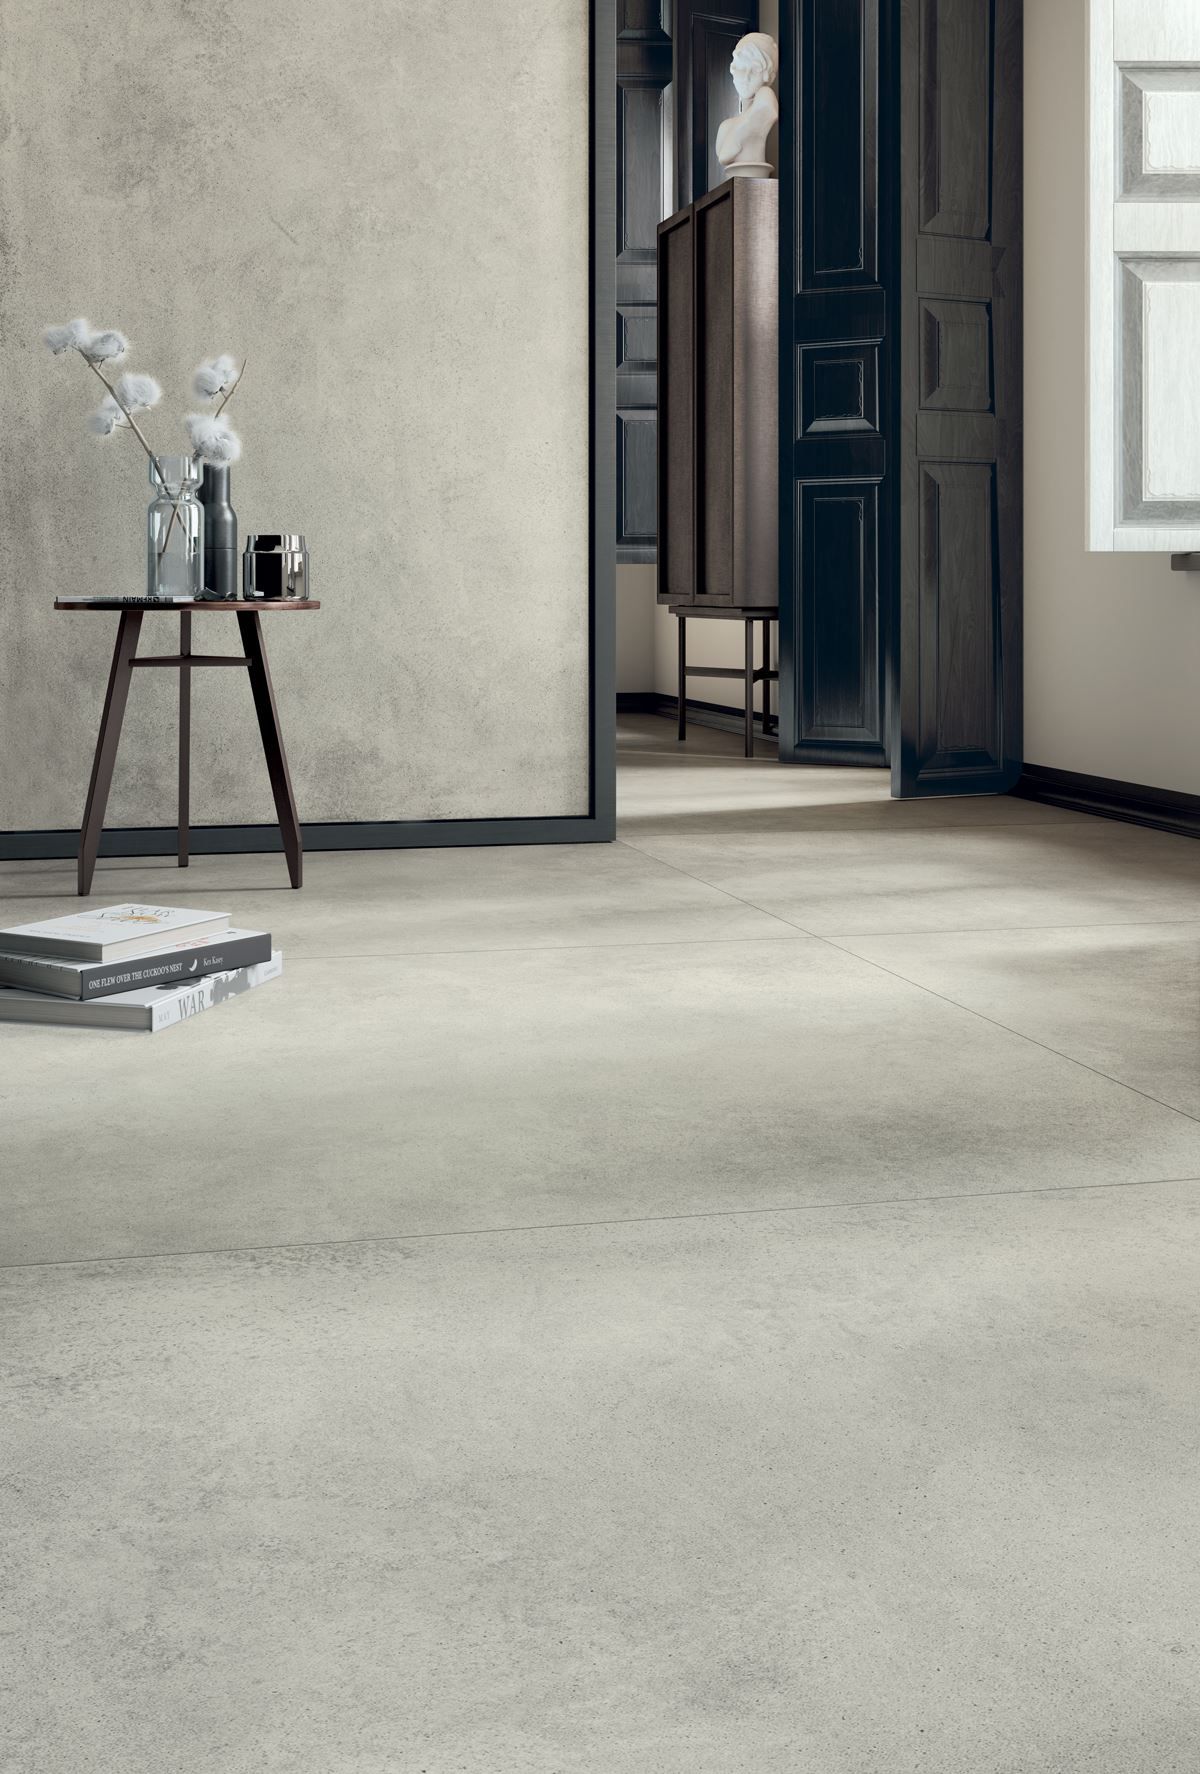 GRUNGE TAUPE Naturale floor 120x120